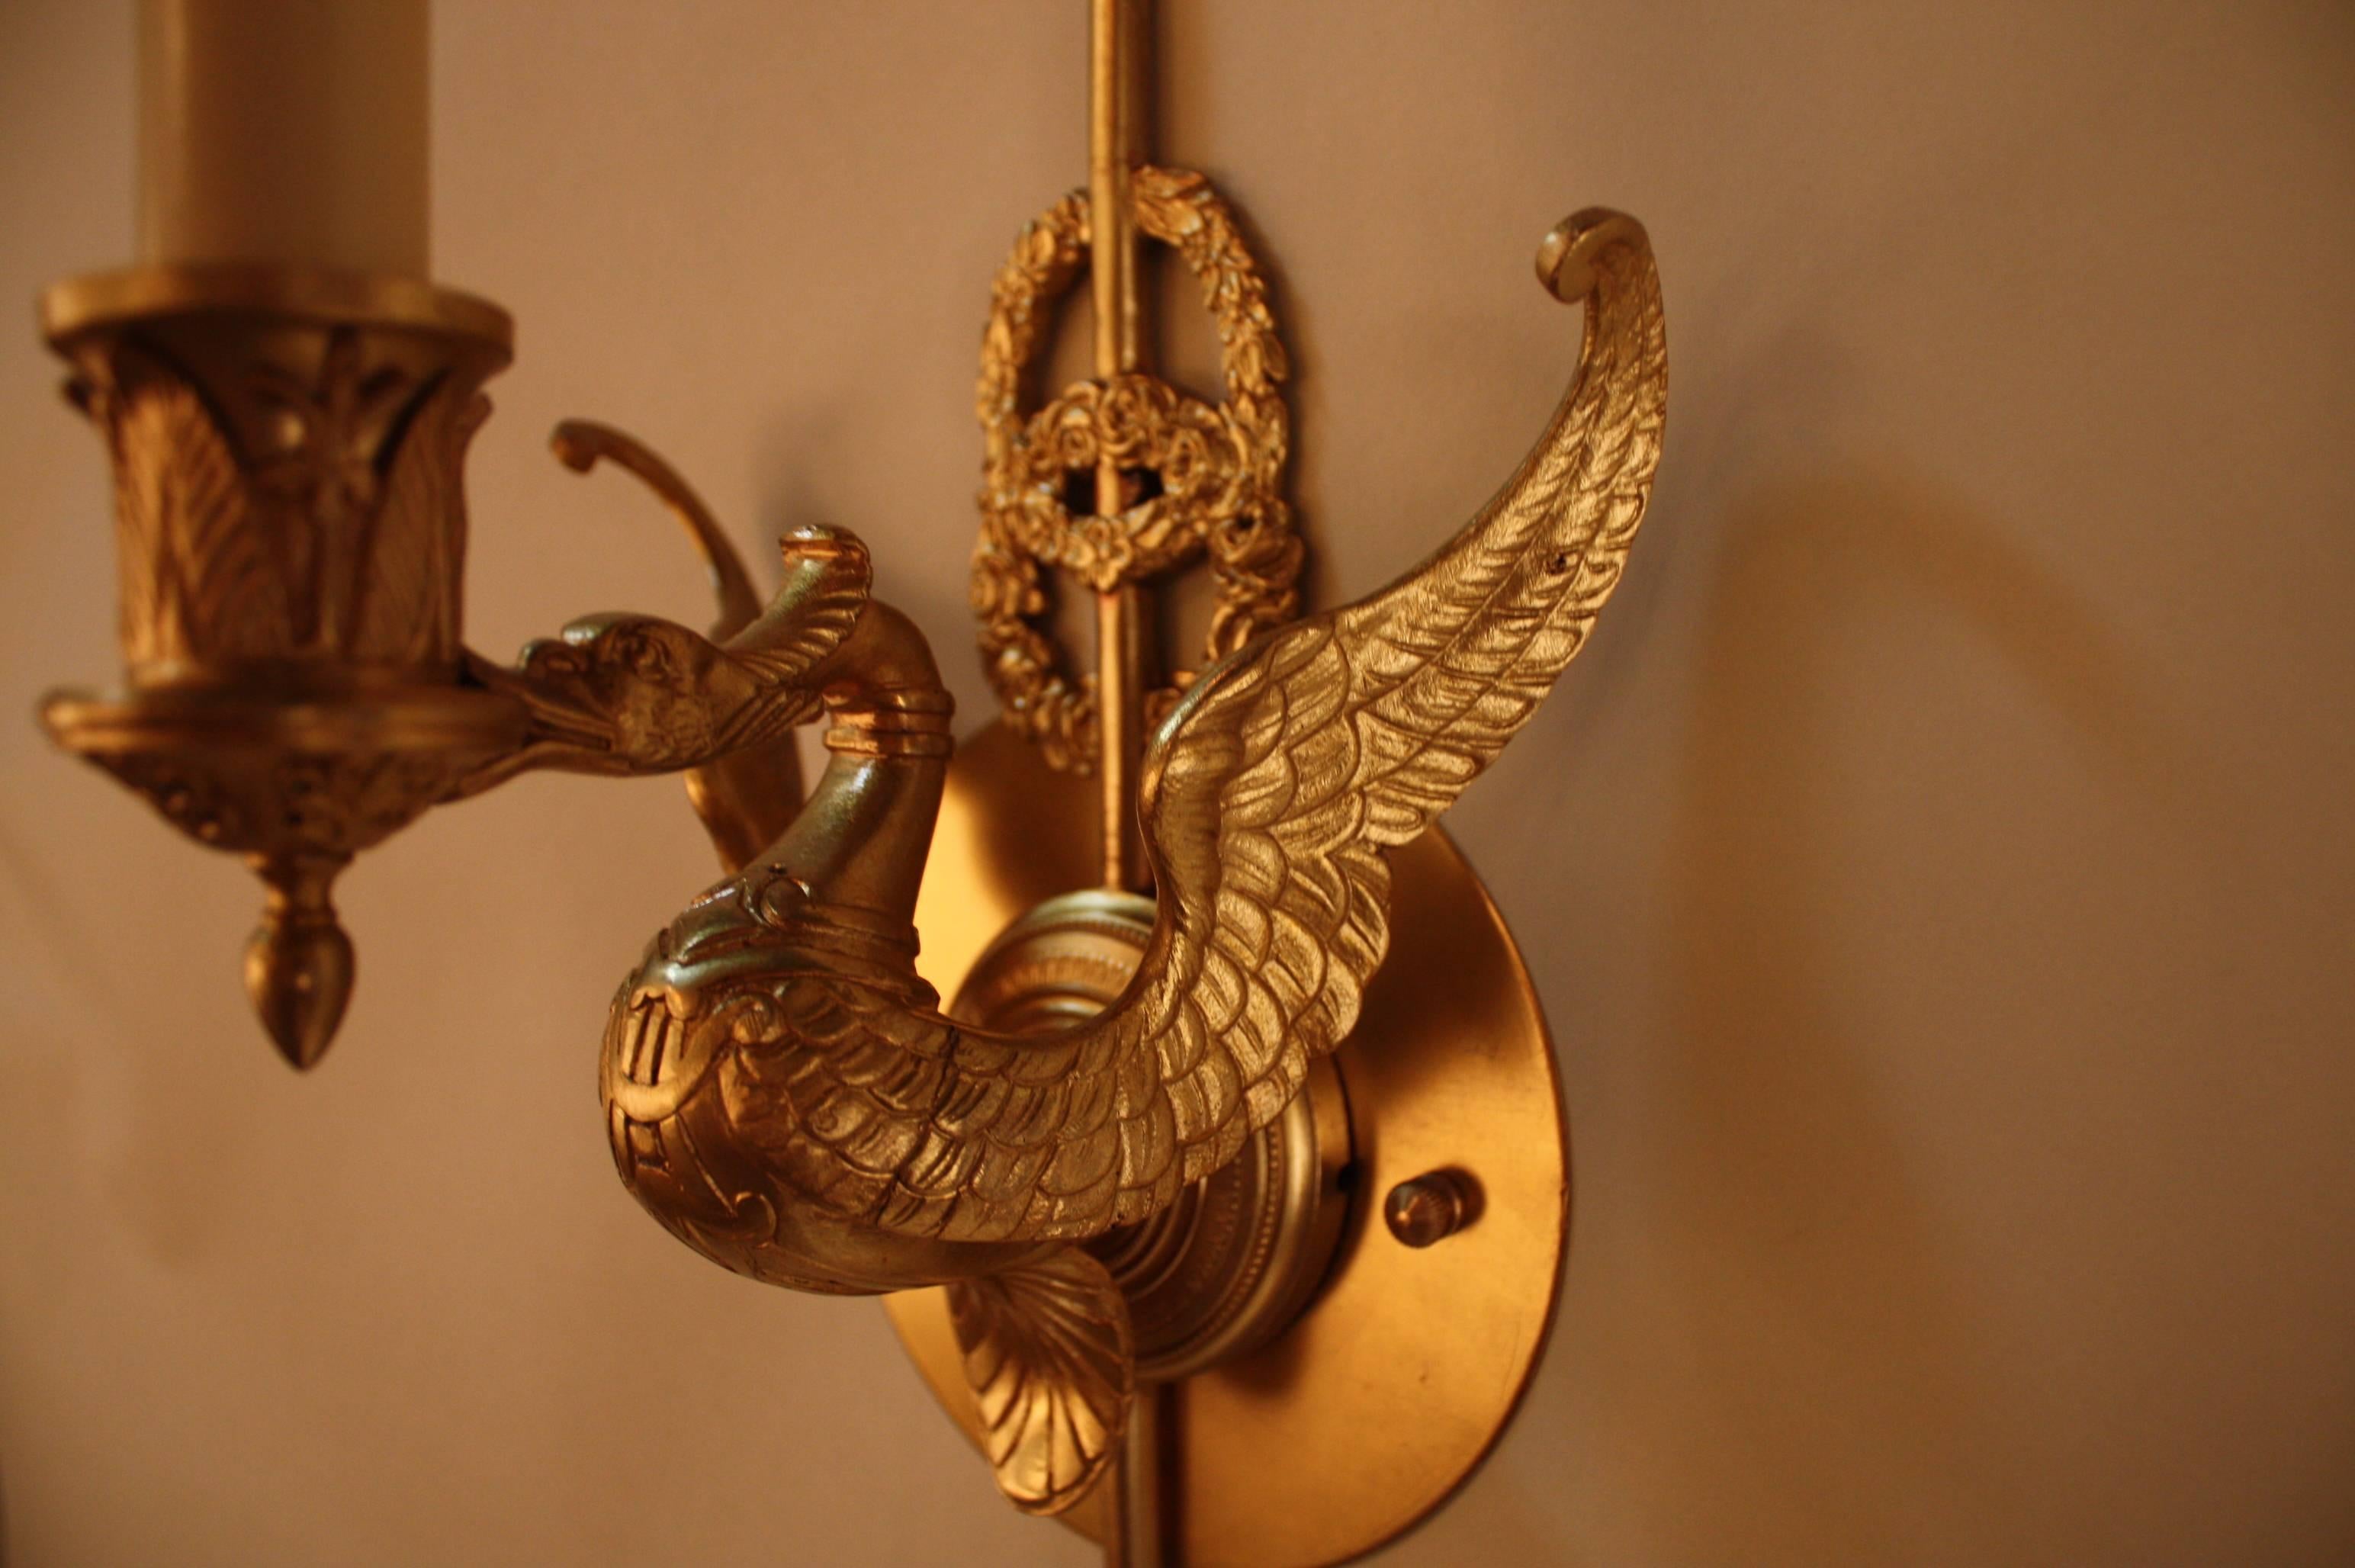 Fantastic pair of single light Empire style wall sconces. Made in France, these elegant sconces feature swan in flying motion in beautiful detail work throughout. Absolutely gorgeous.
Measurement is without lampshade.